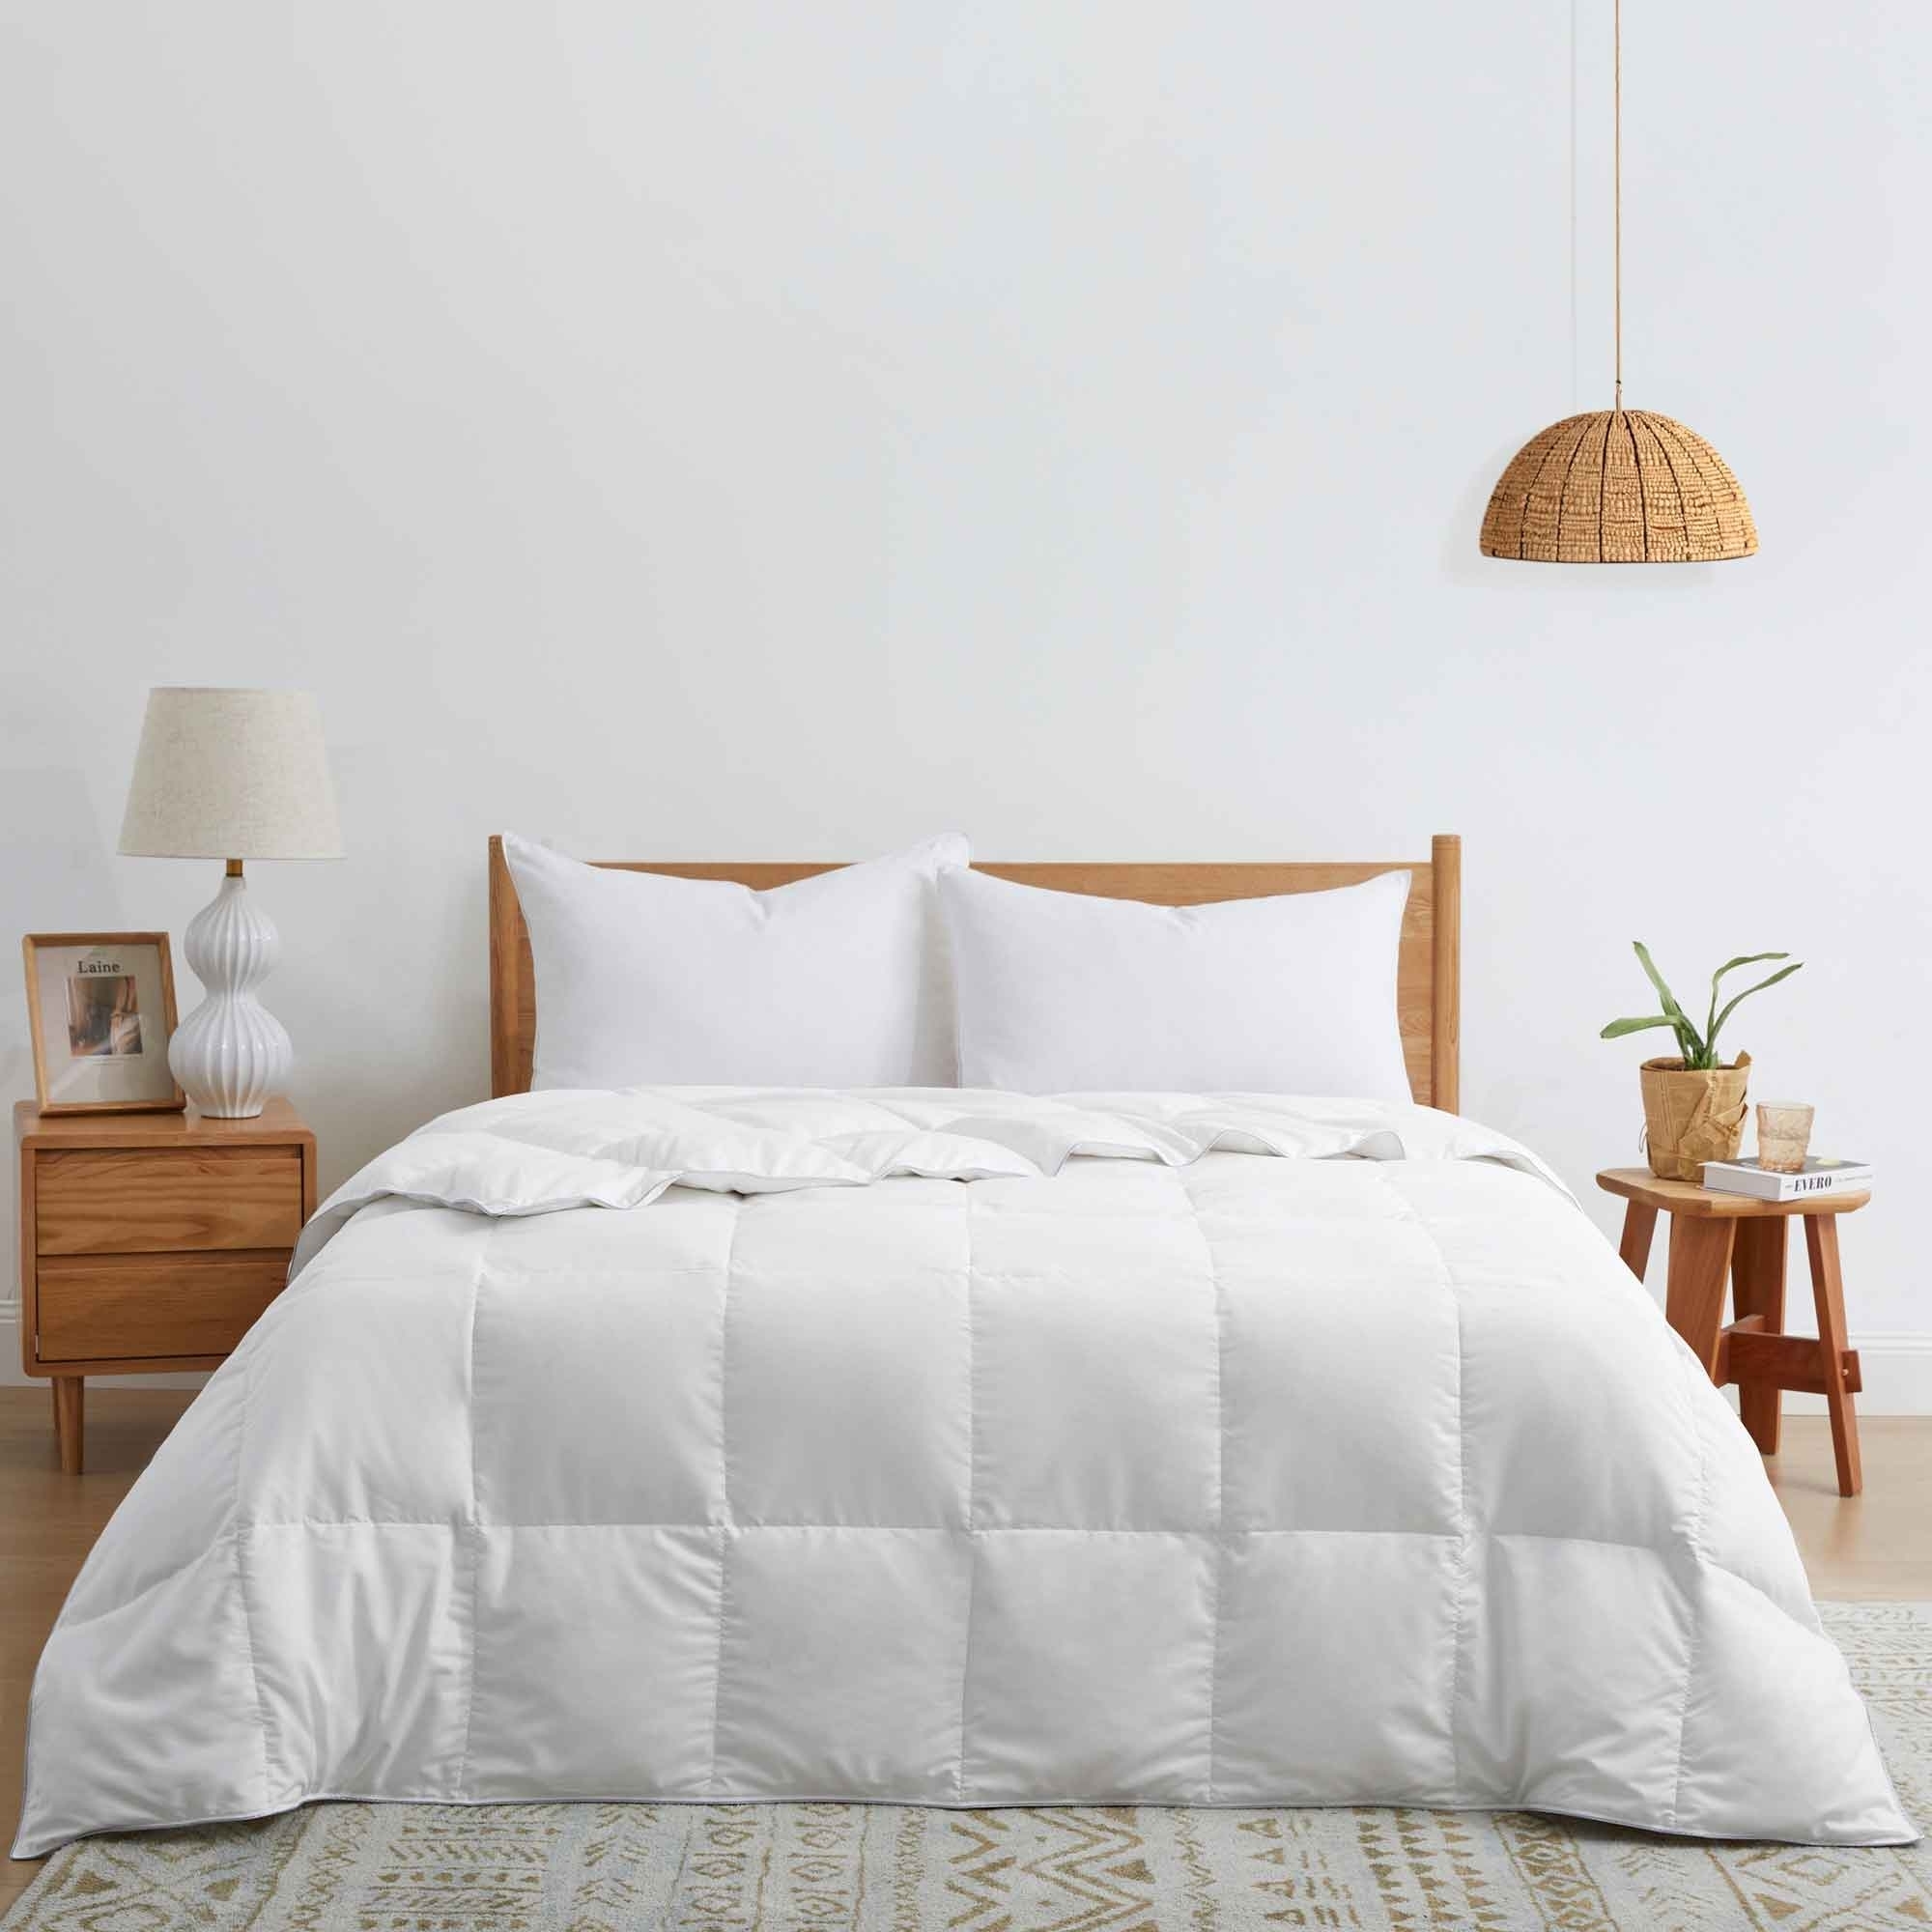 Lightweight Goose Feather And Down Comforter- Hotel Collection For Hot Sleepers - White, Twin